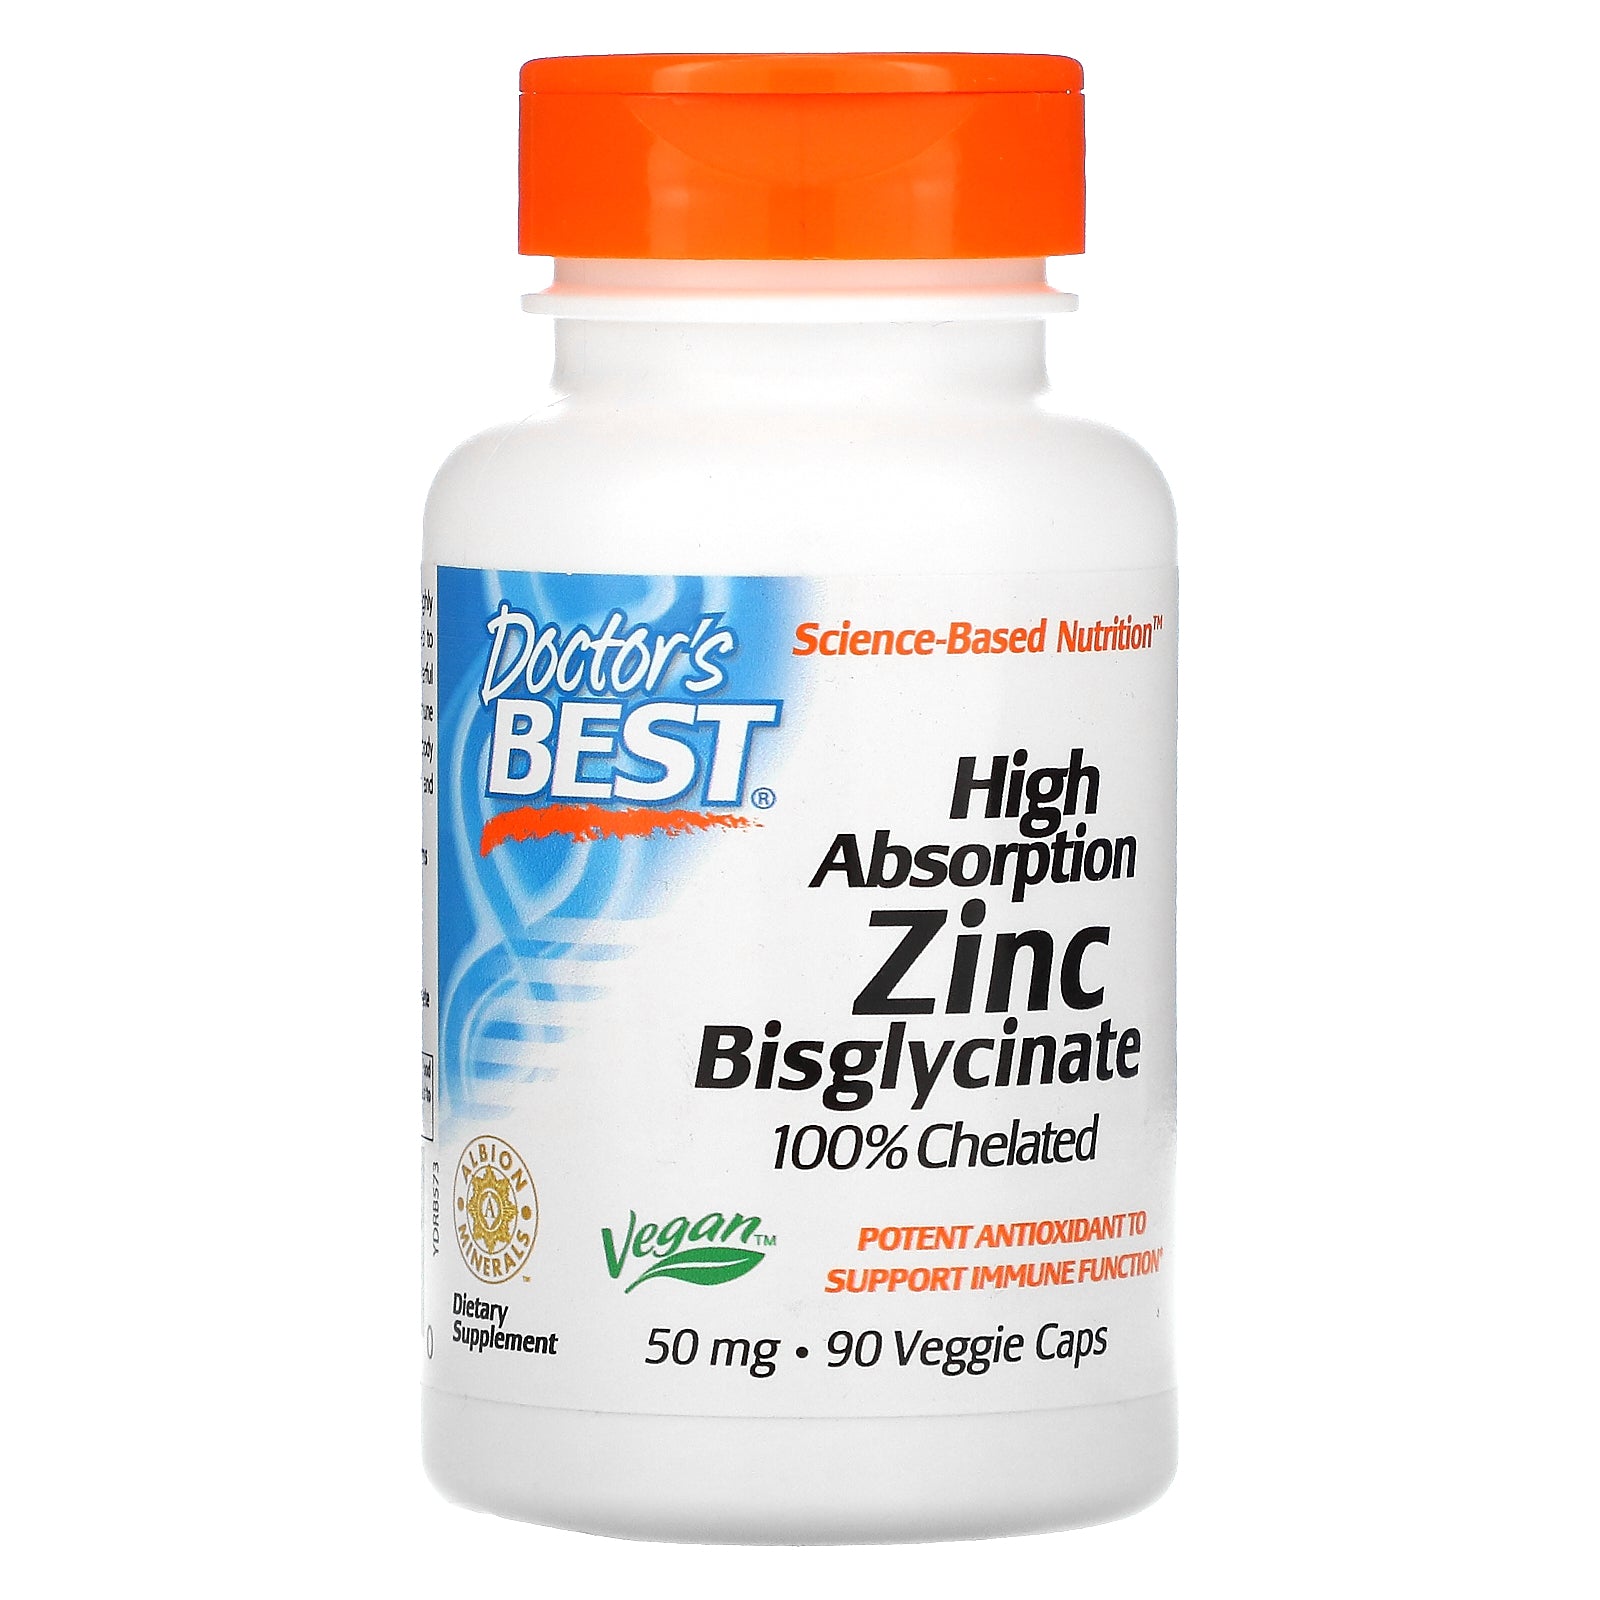 Doctor's Best, High Absorption Zinc Bisglycinate, 100% Chelated, 50 mg